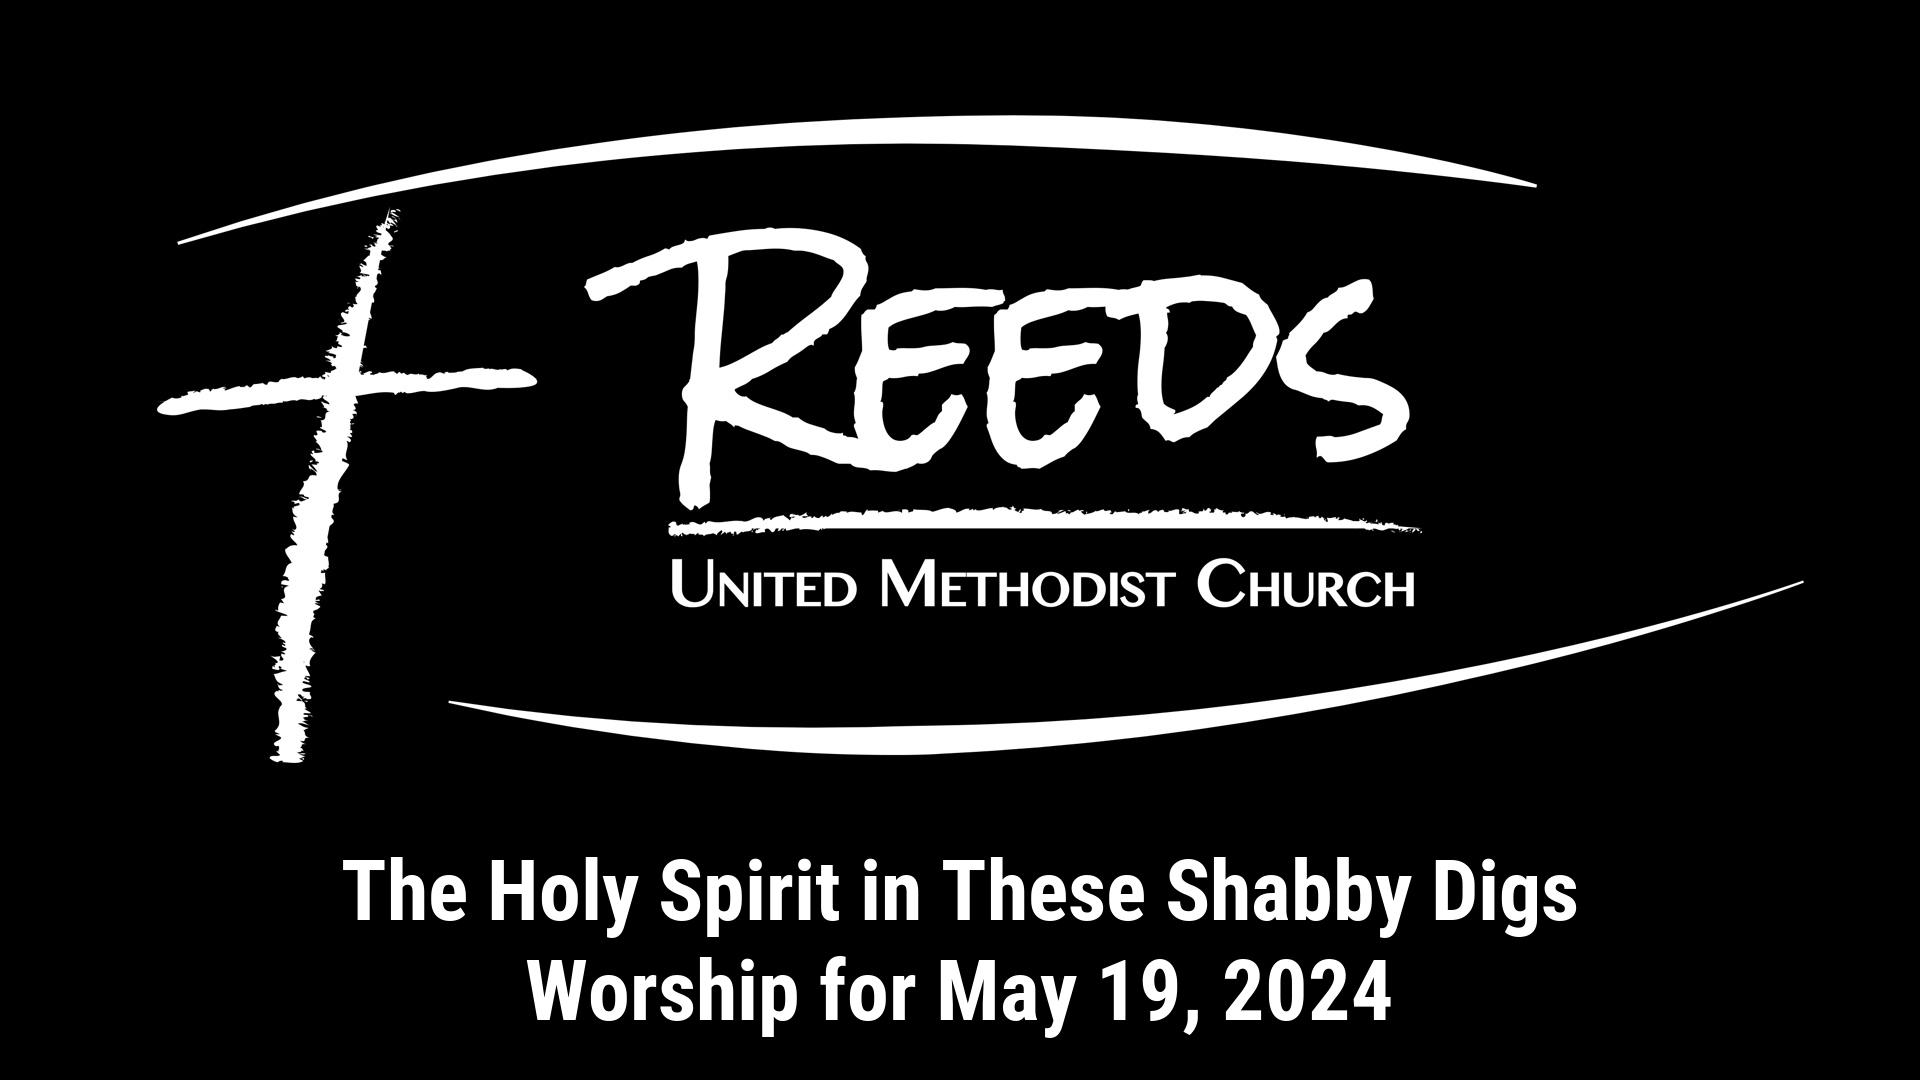 Reeds UMC logo with sermon title, "The Holy Spirit in These Shabby Digs" with the date, "May 19, 2024."